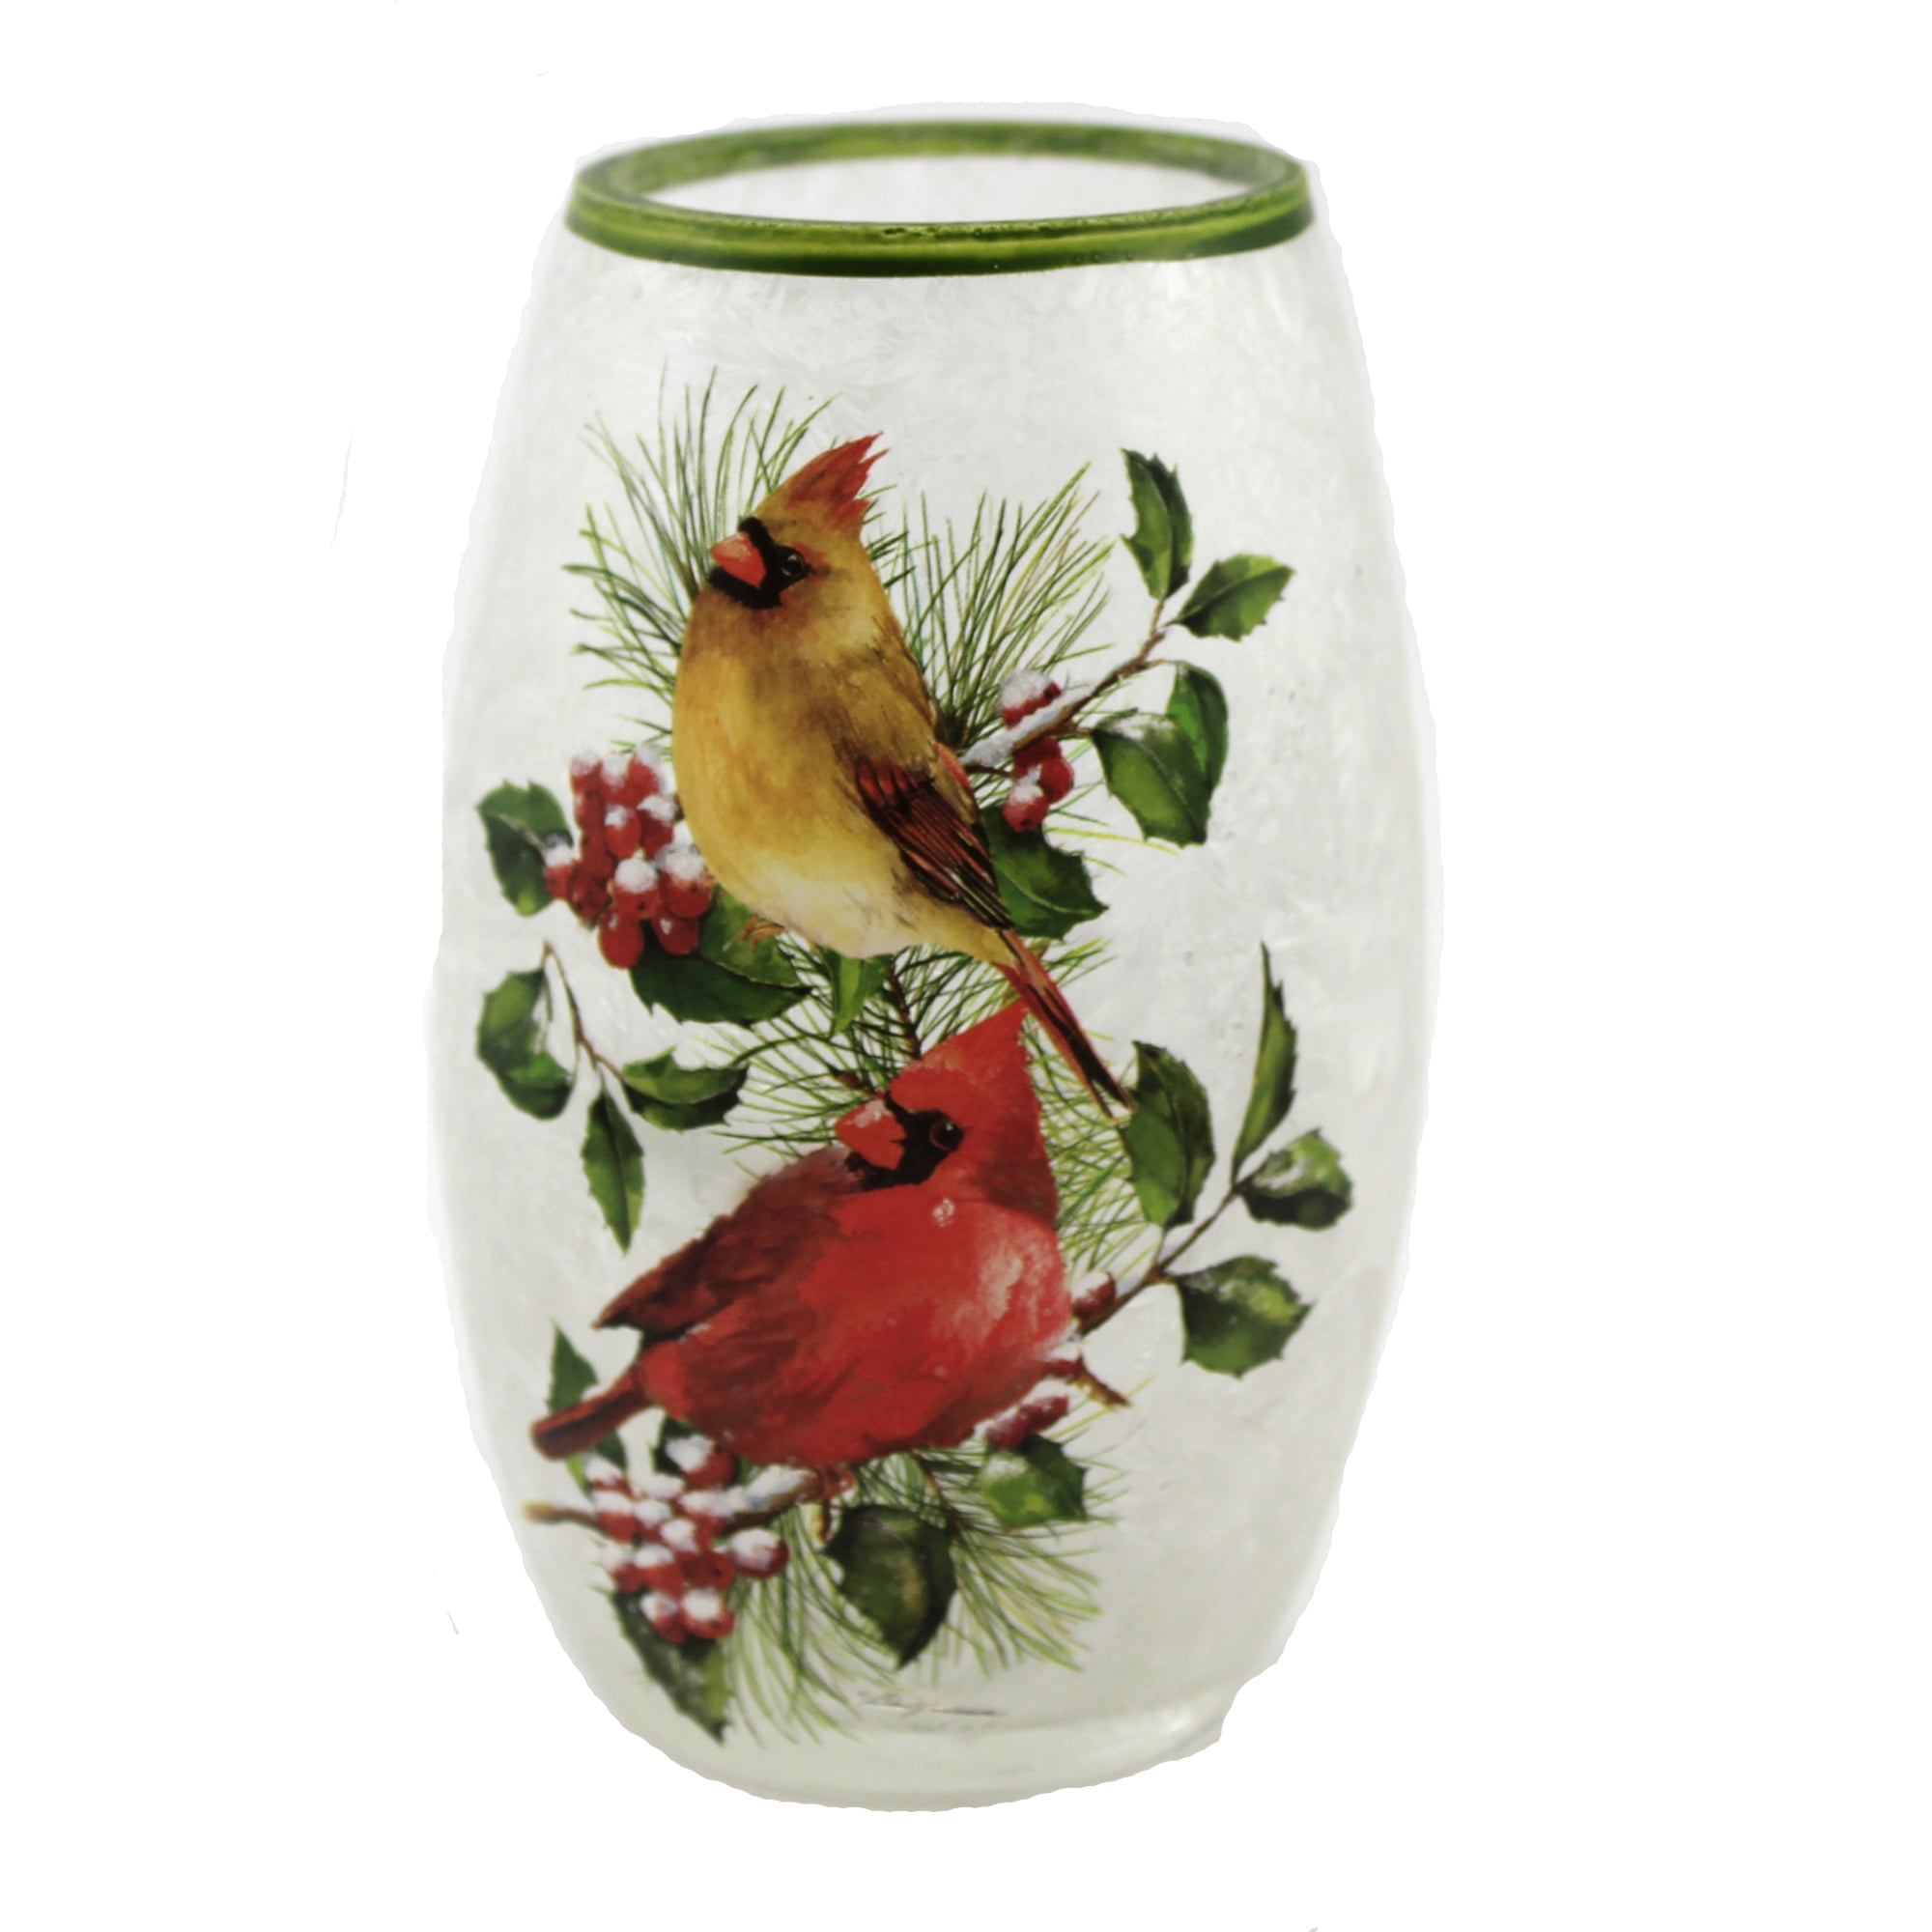 Stony Creek 7 Lighted Vase Cardinal with Berries Frosted Glass